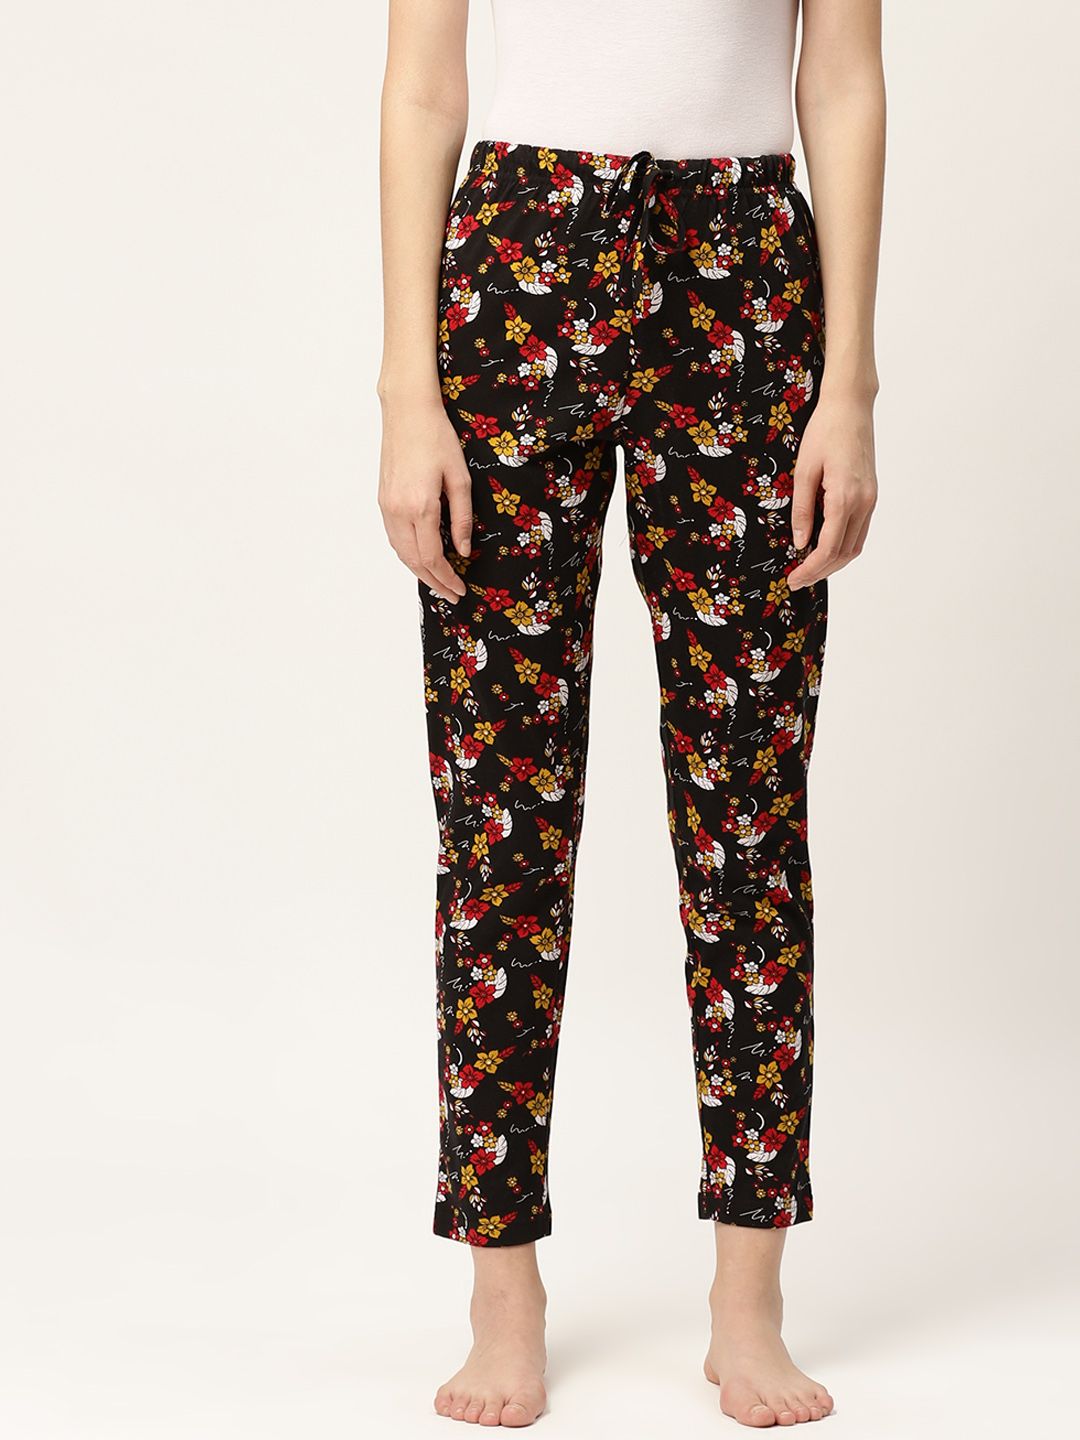 ETC Women Black & Red Floral Print Lounge Pants Price in India